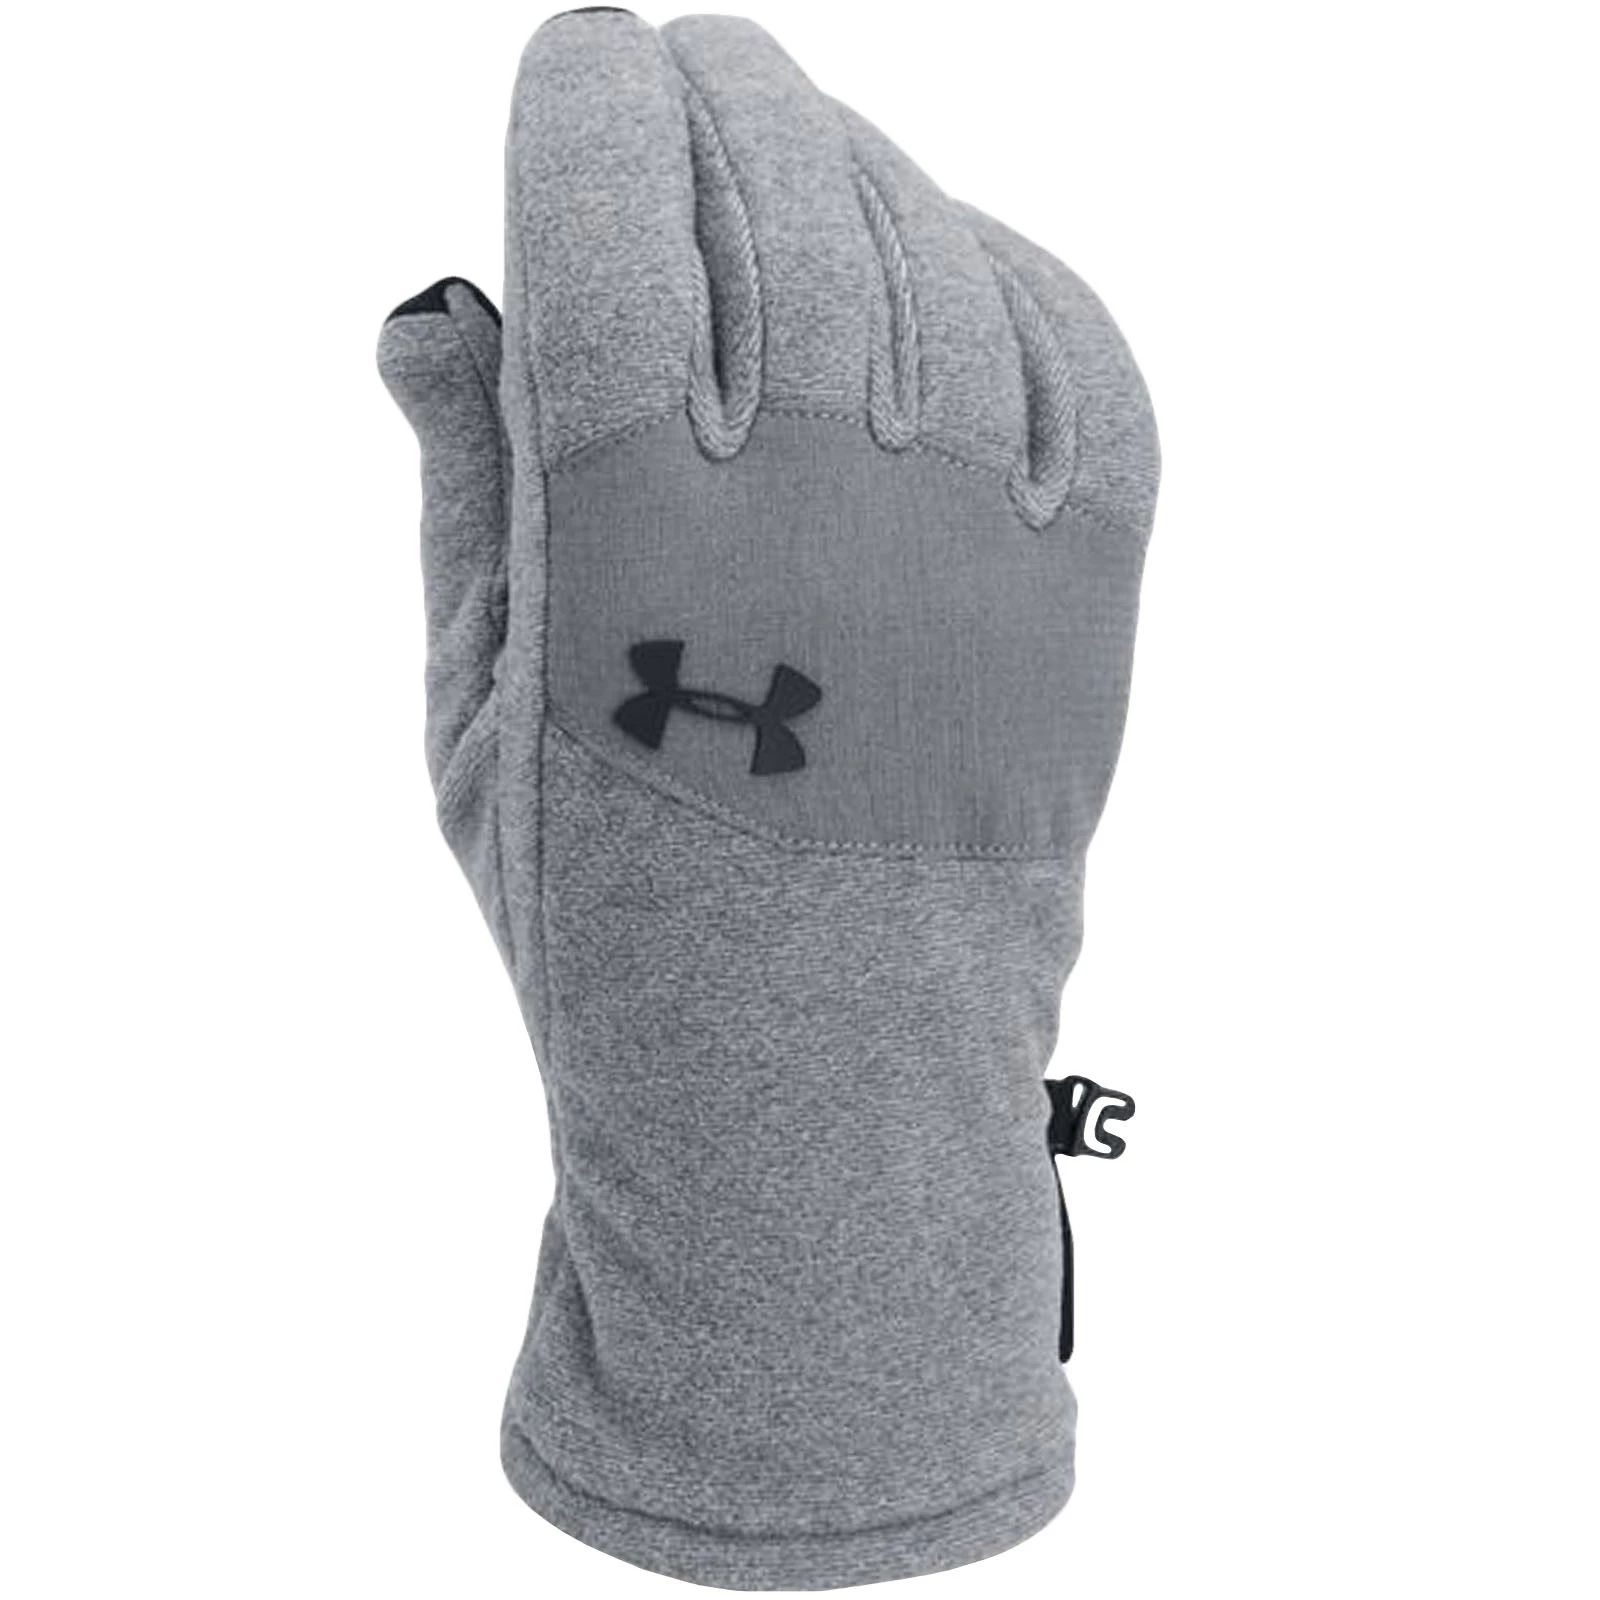 New Under Armour Mens ColdGear Infrared Fleece Gloves with Touch Tech Sm Gry/Blk 